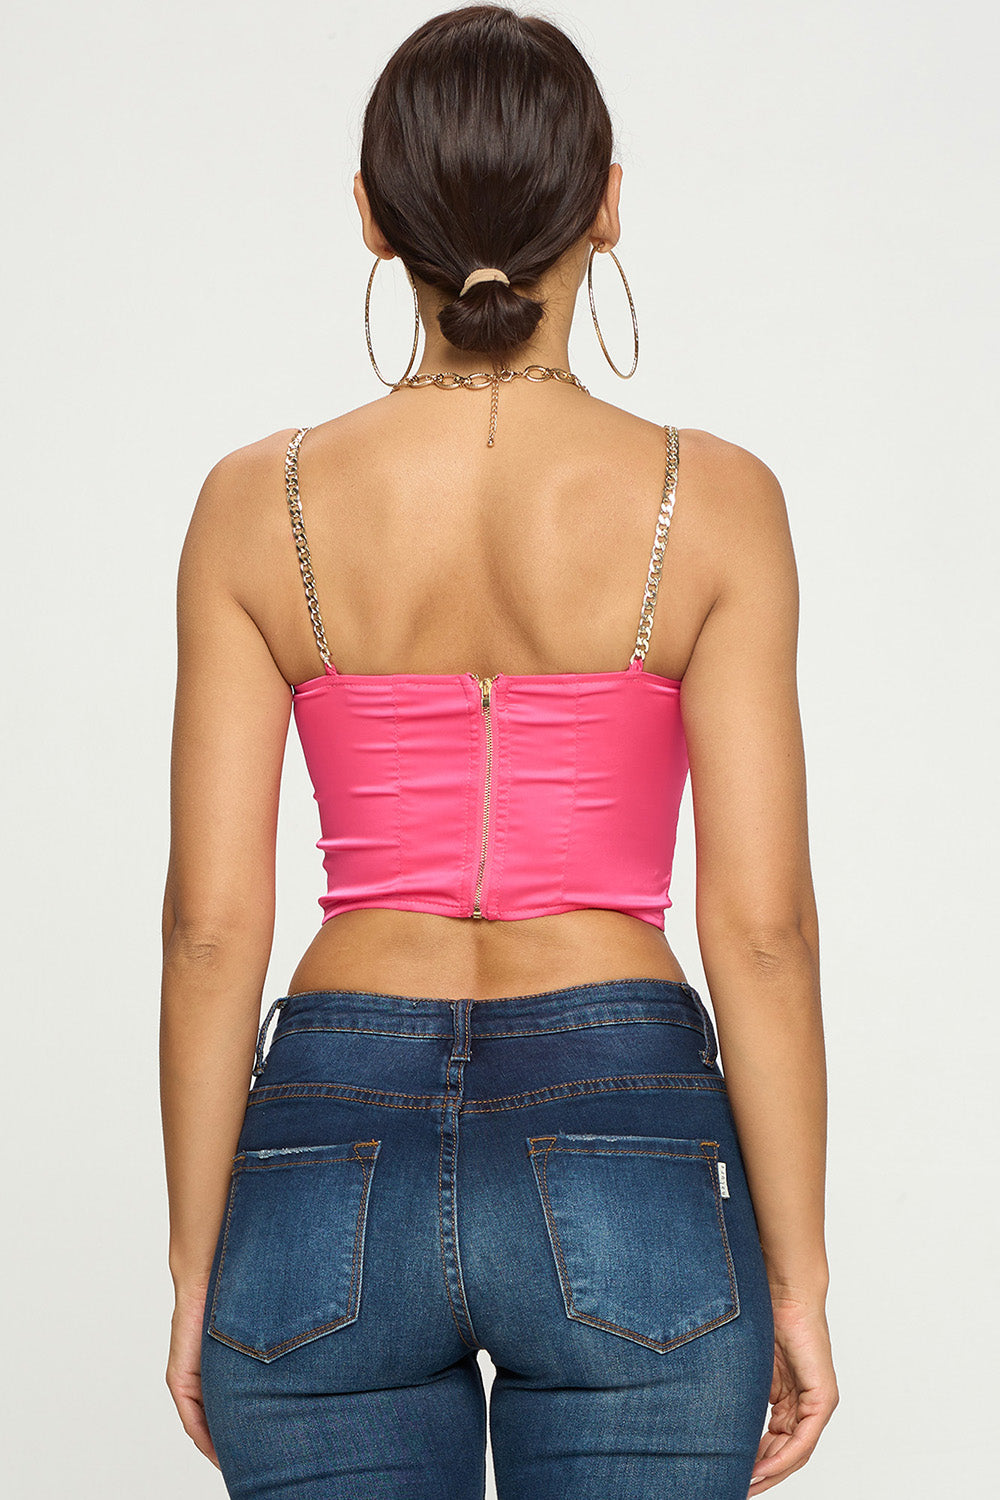 SATIN BUSTIER CROP TOP WITH GOLD CHAIN SHOULDER STRAP